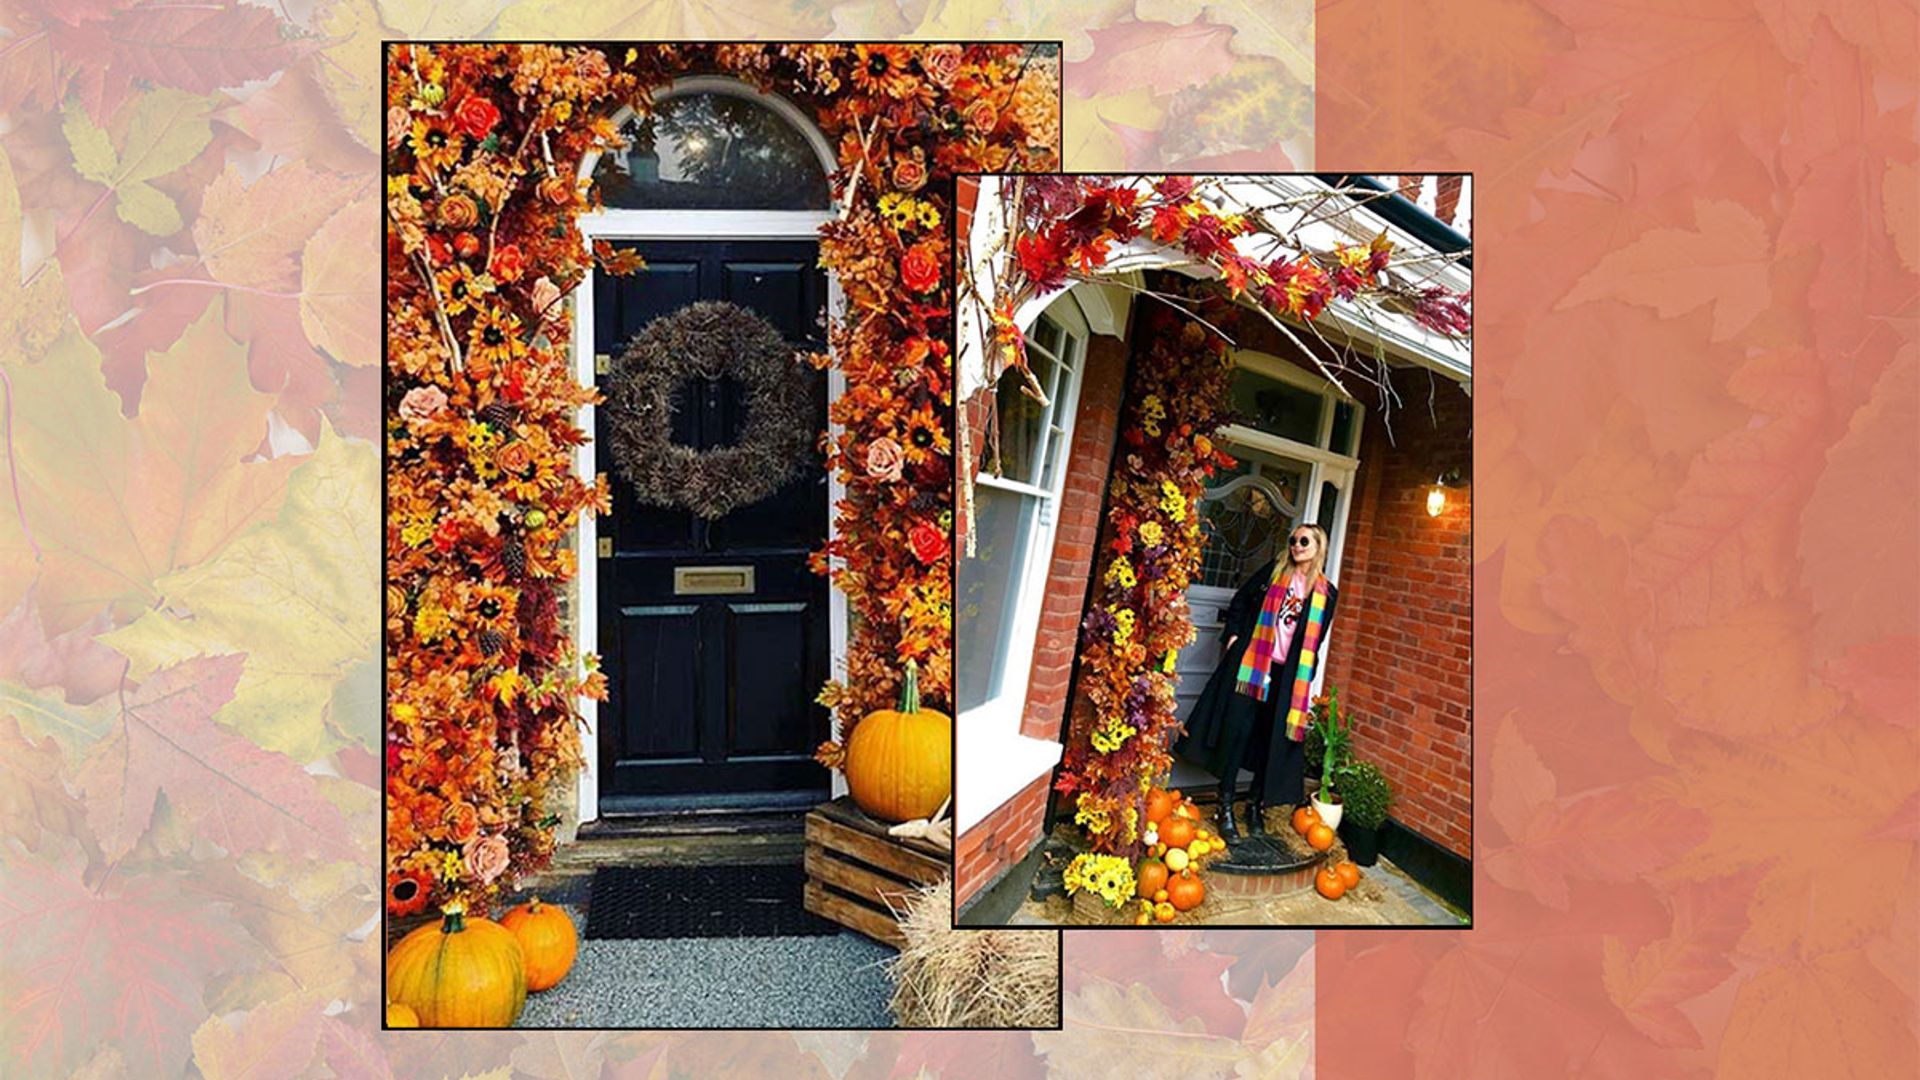 Autumn doorscapes are the homeware craze you need to know for 2020 – just ask Stacey Solomon & Laura Whitmore